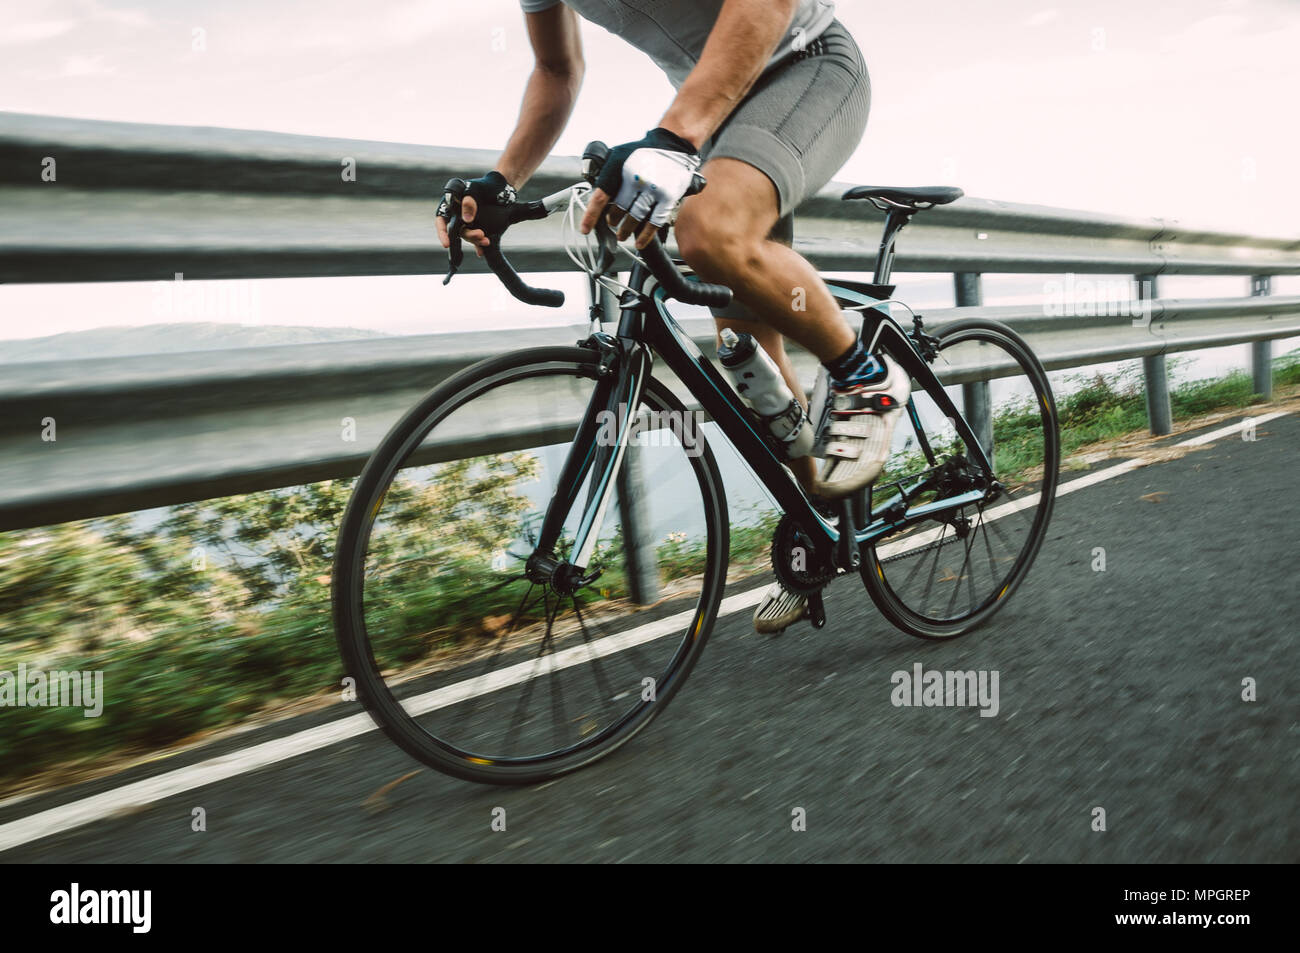 Detail of a road bike with a cyclist pedaling on a road. Stock Photo